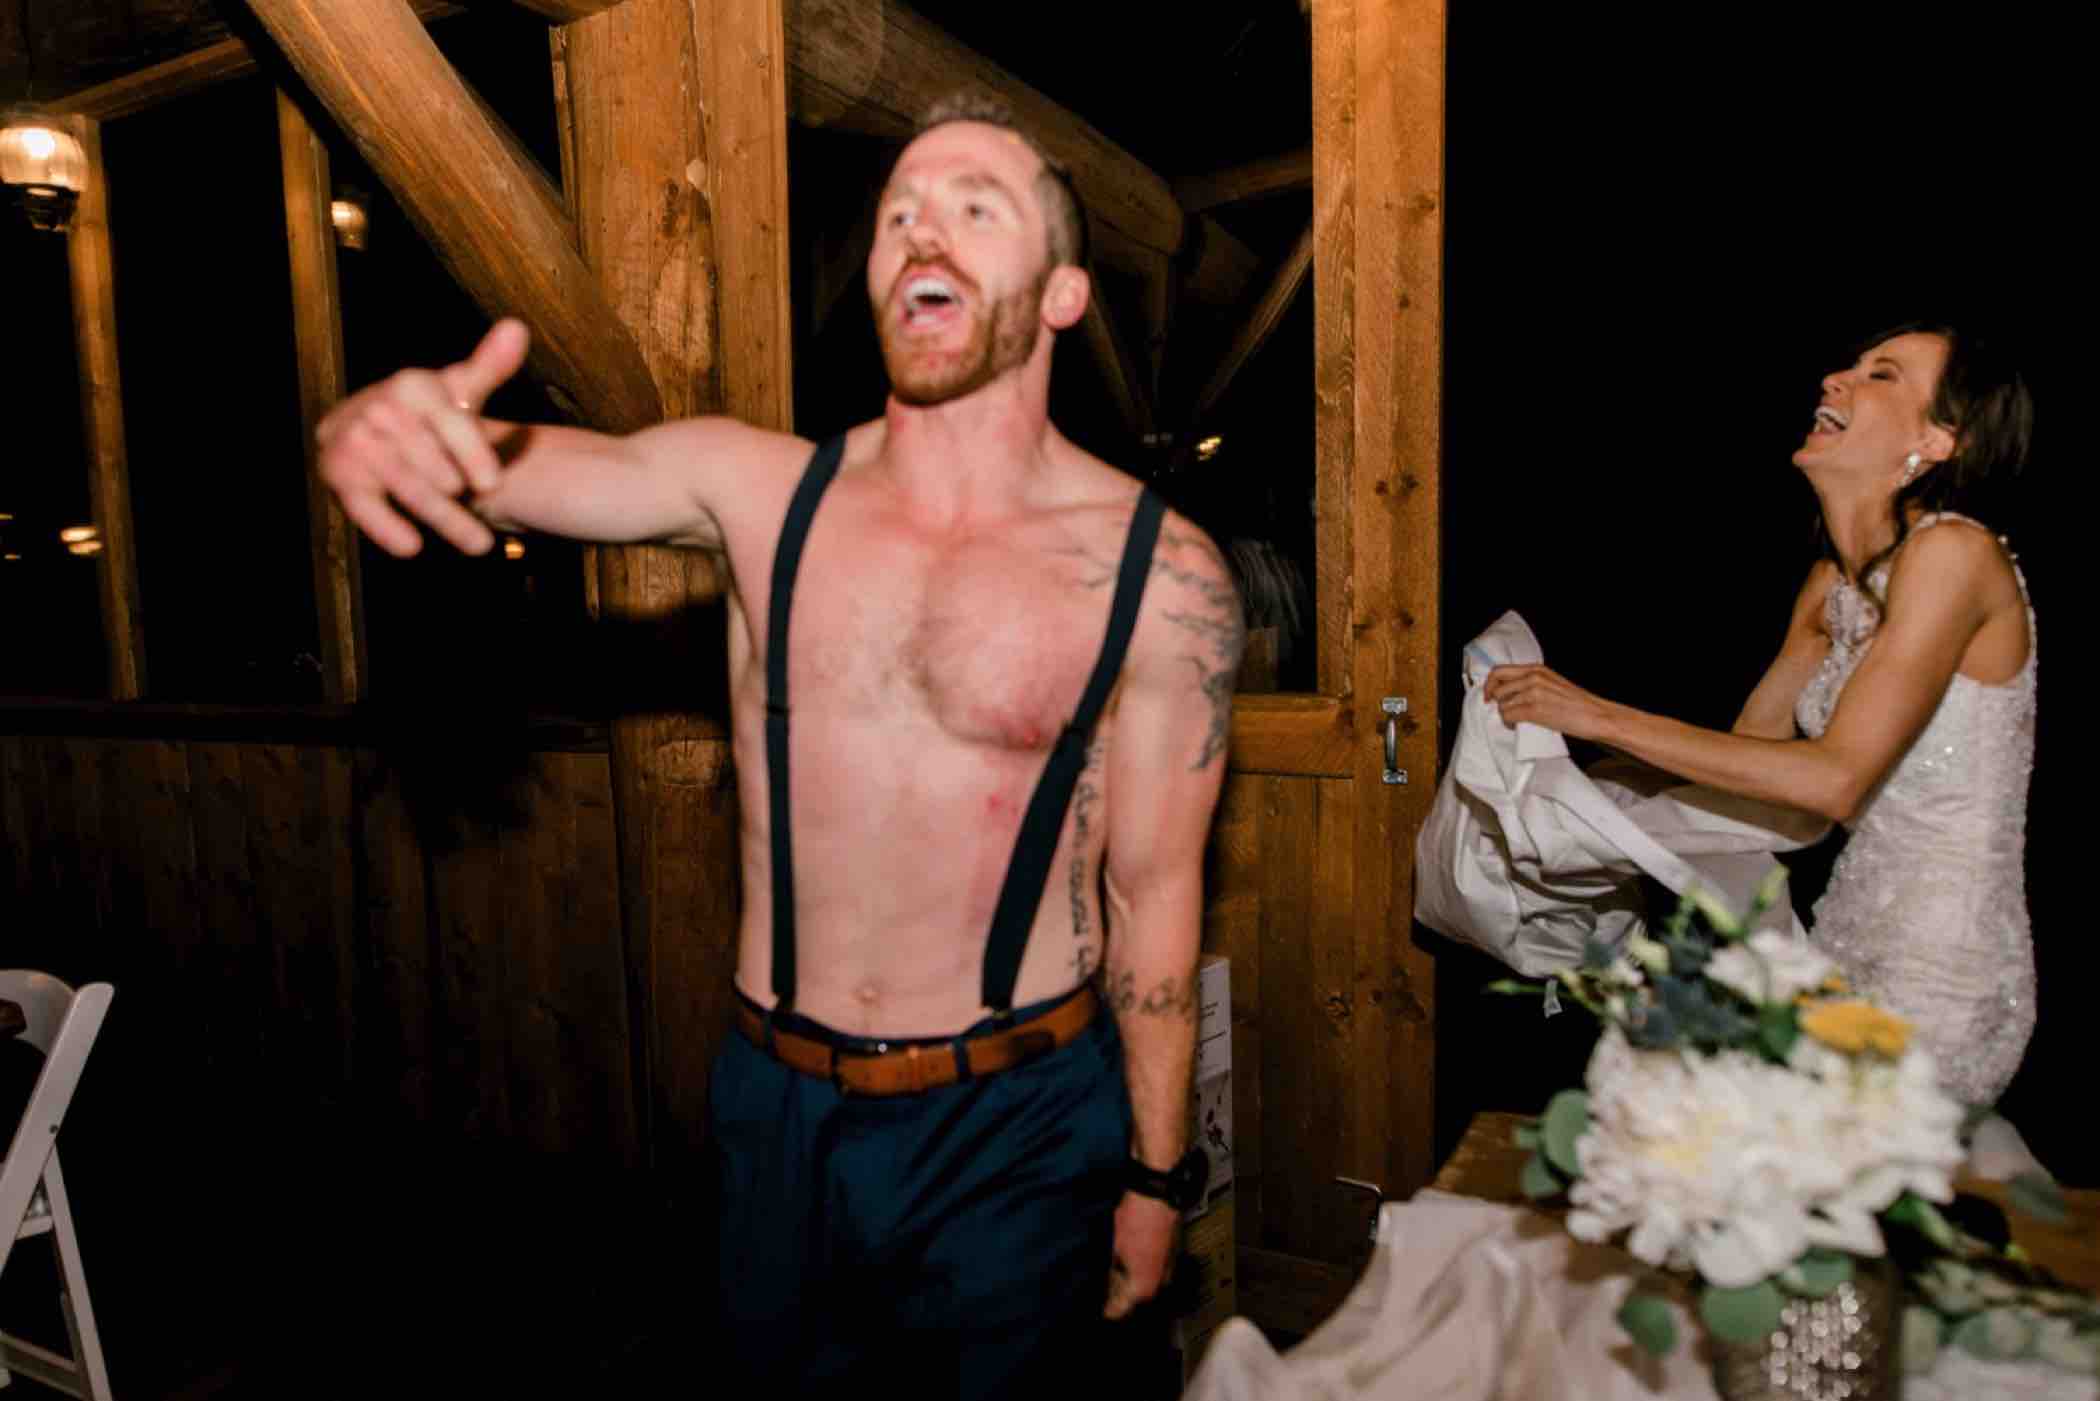 The groom dances shirtless at his wedding reception at Piney River Ranch in Vail, Colorado. Photo by Ali and Garrett, Romantic, Adventurous, Nostalgic Wedding Photographers.